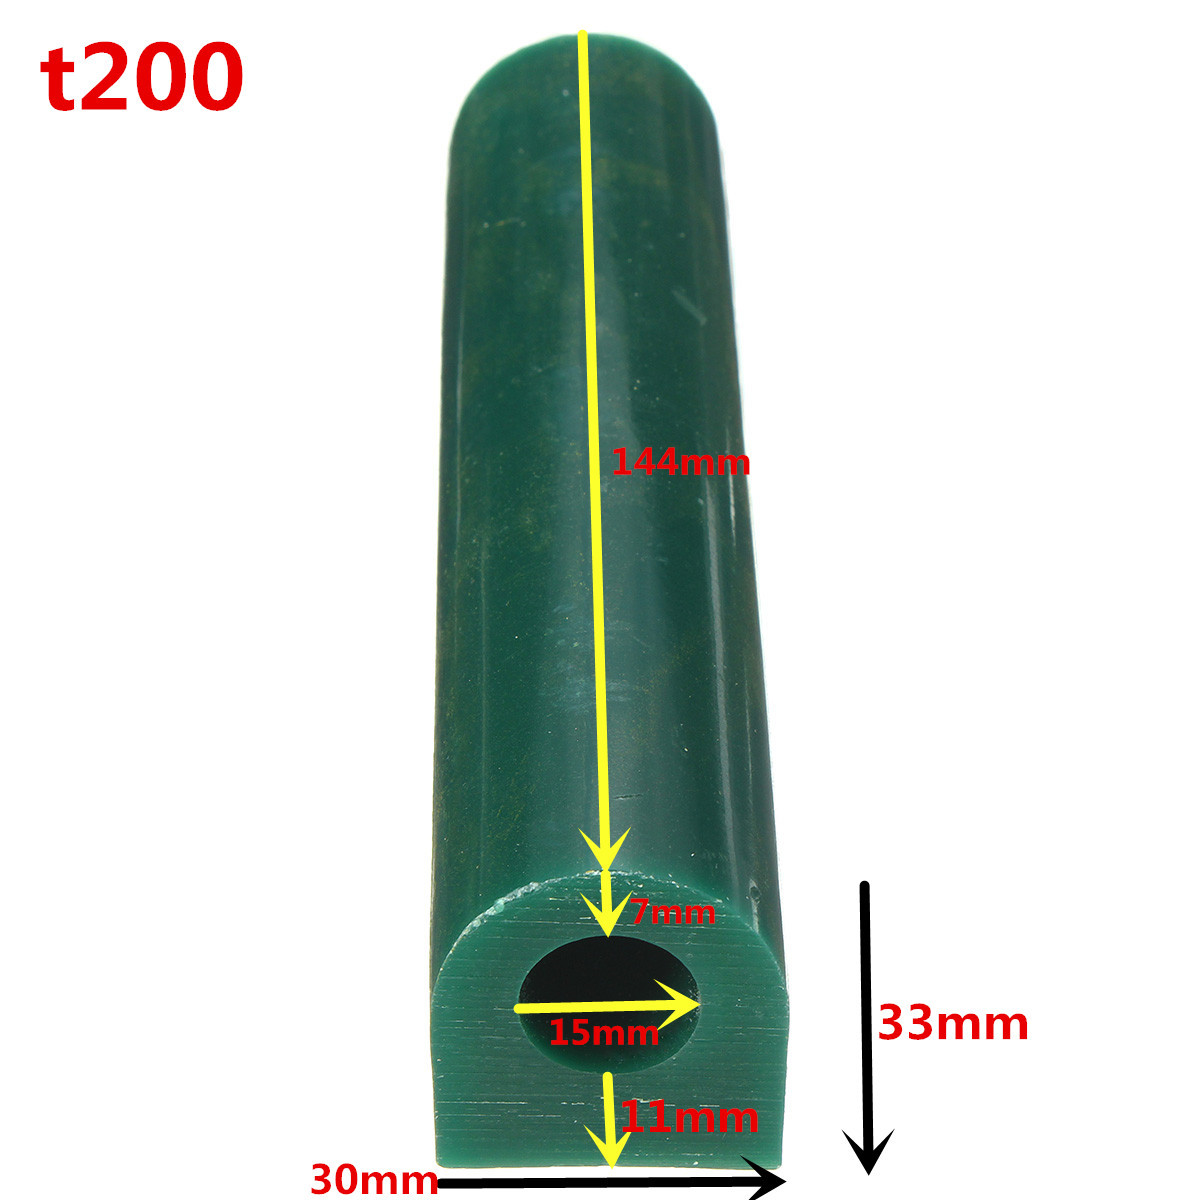 Green-Wax-Ring-Mould-Tube-Carving-Flat-Top-Jewellery-Making-Jewelers-Tool-T200-1406000